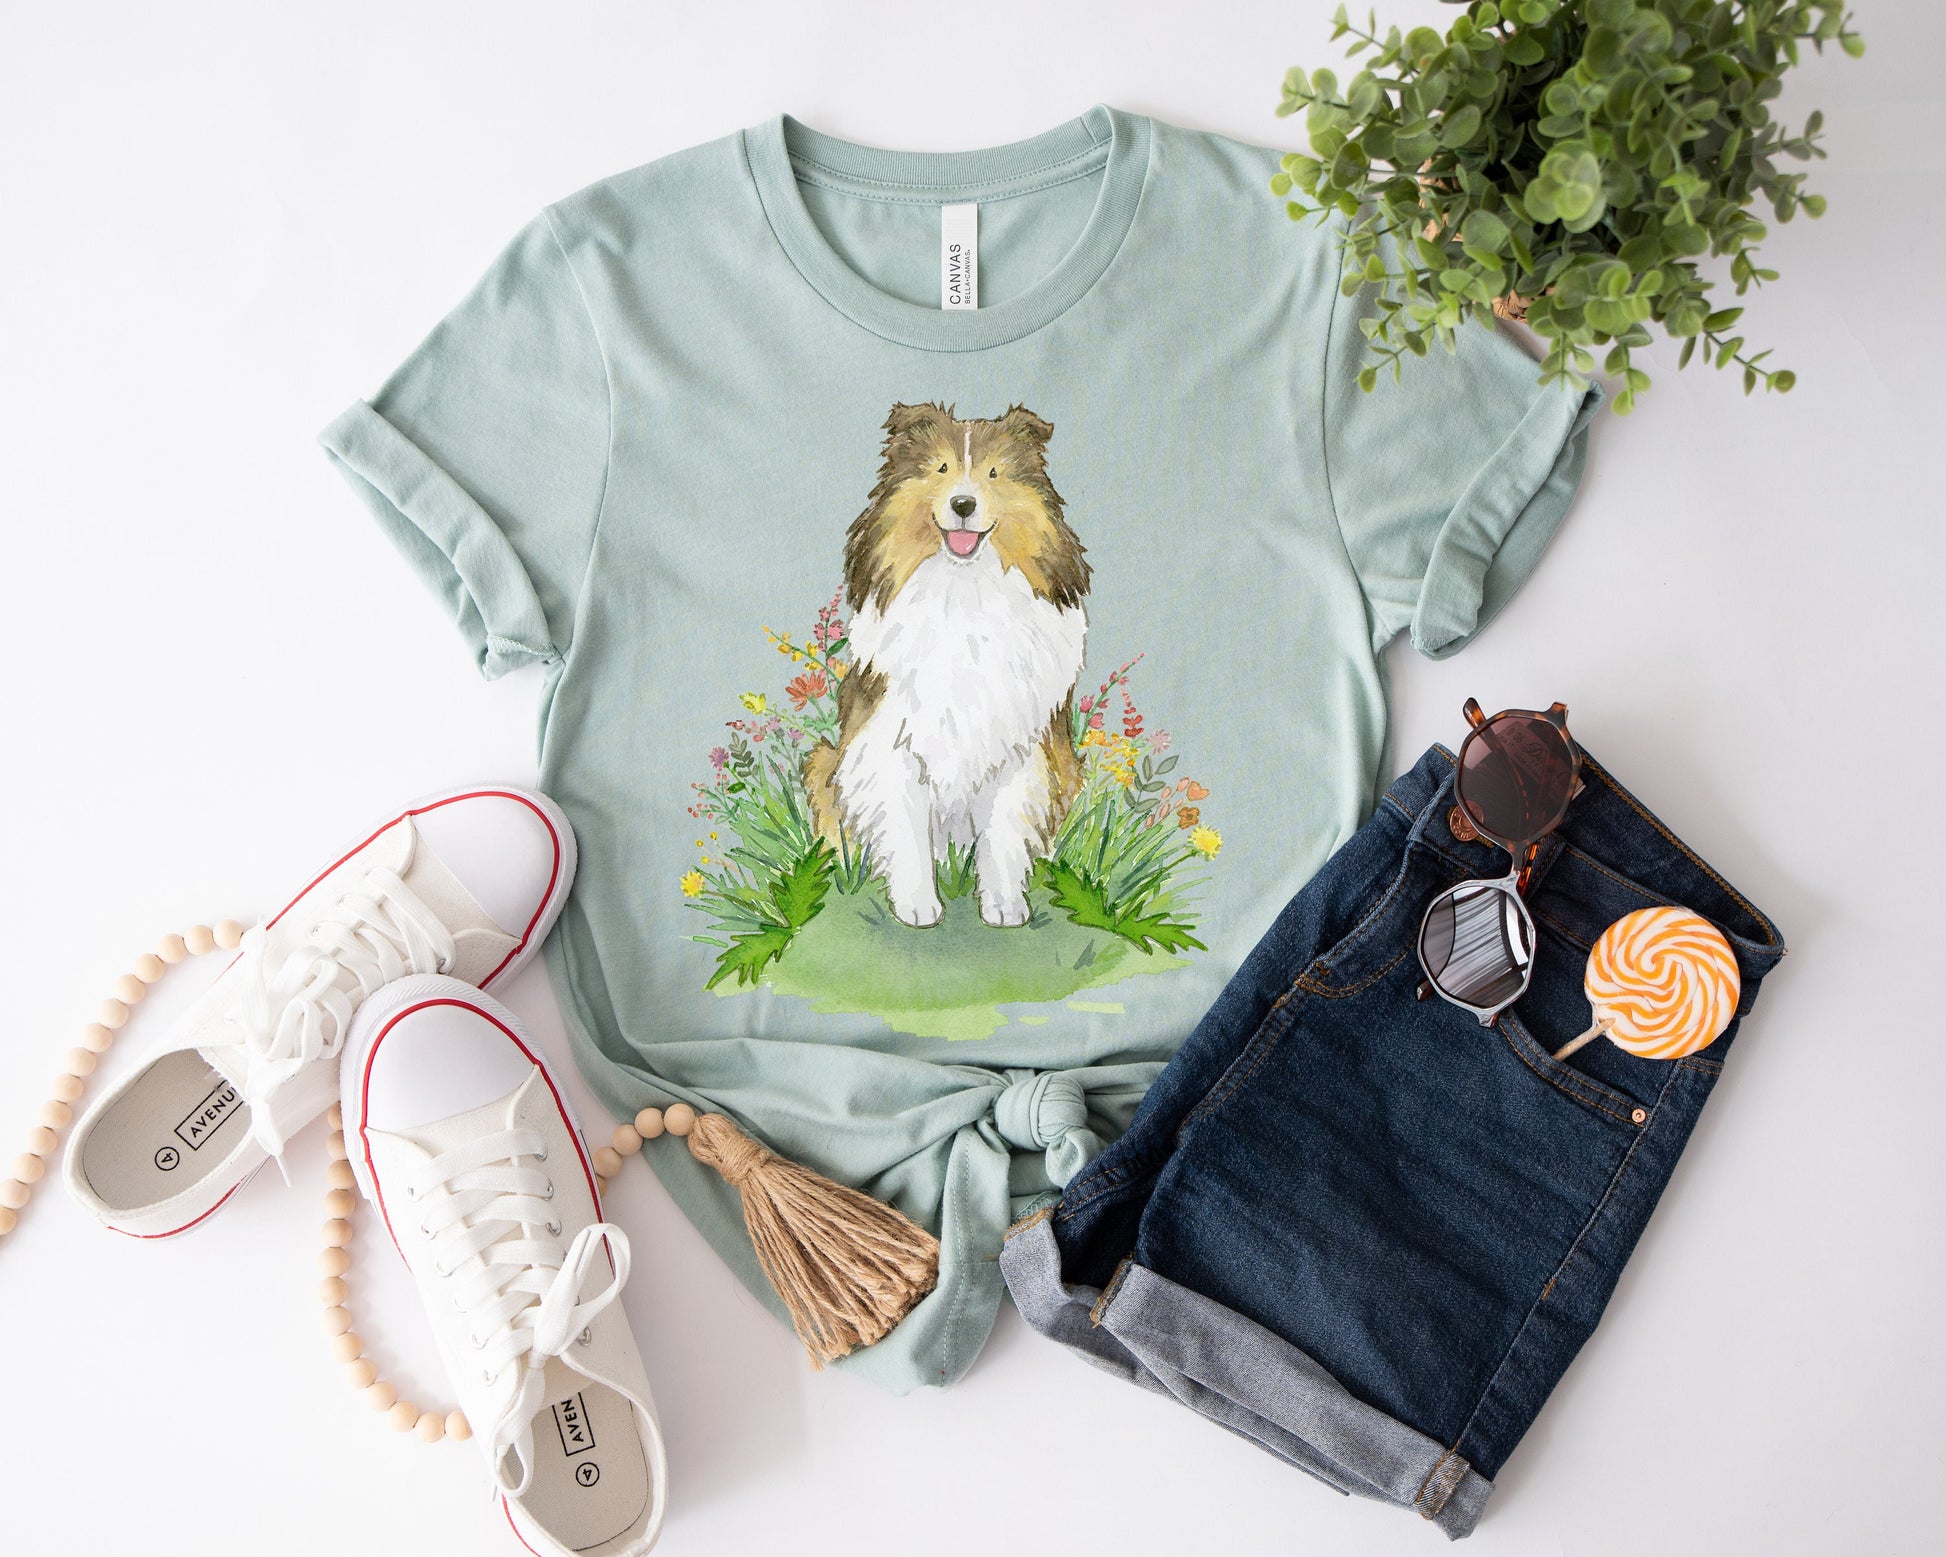 Kids tee shirt with sable sheltie dog and flowers on it.